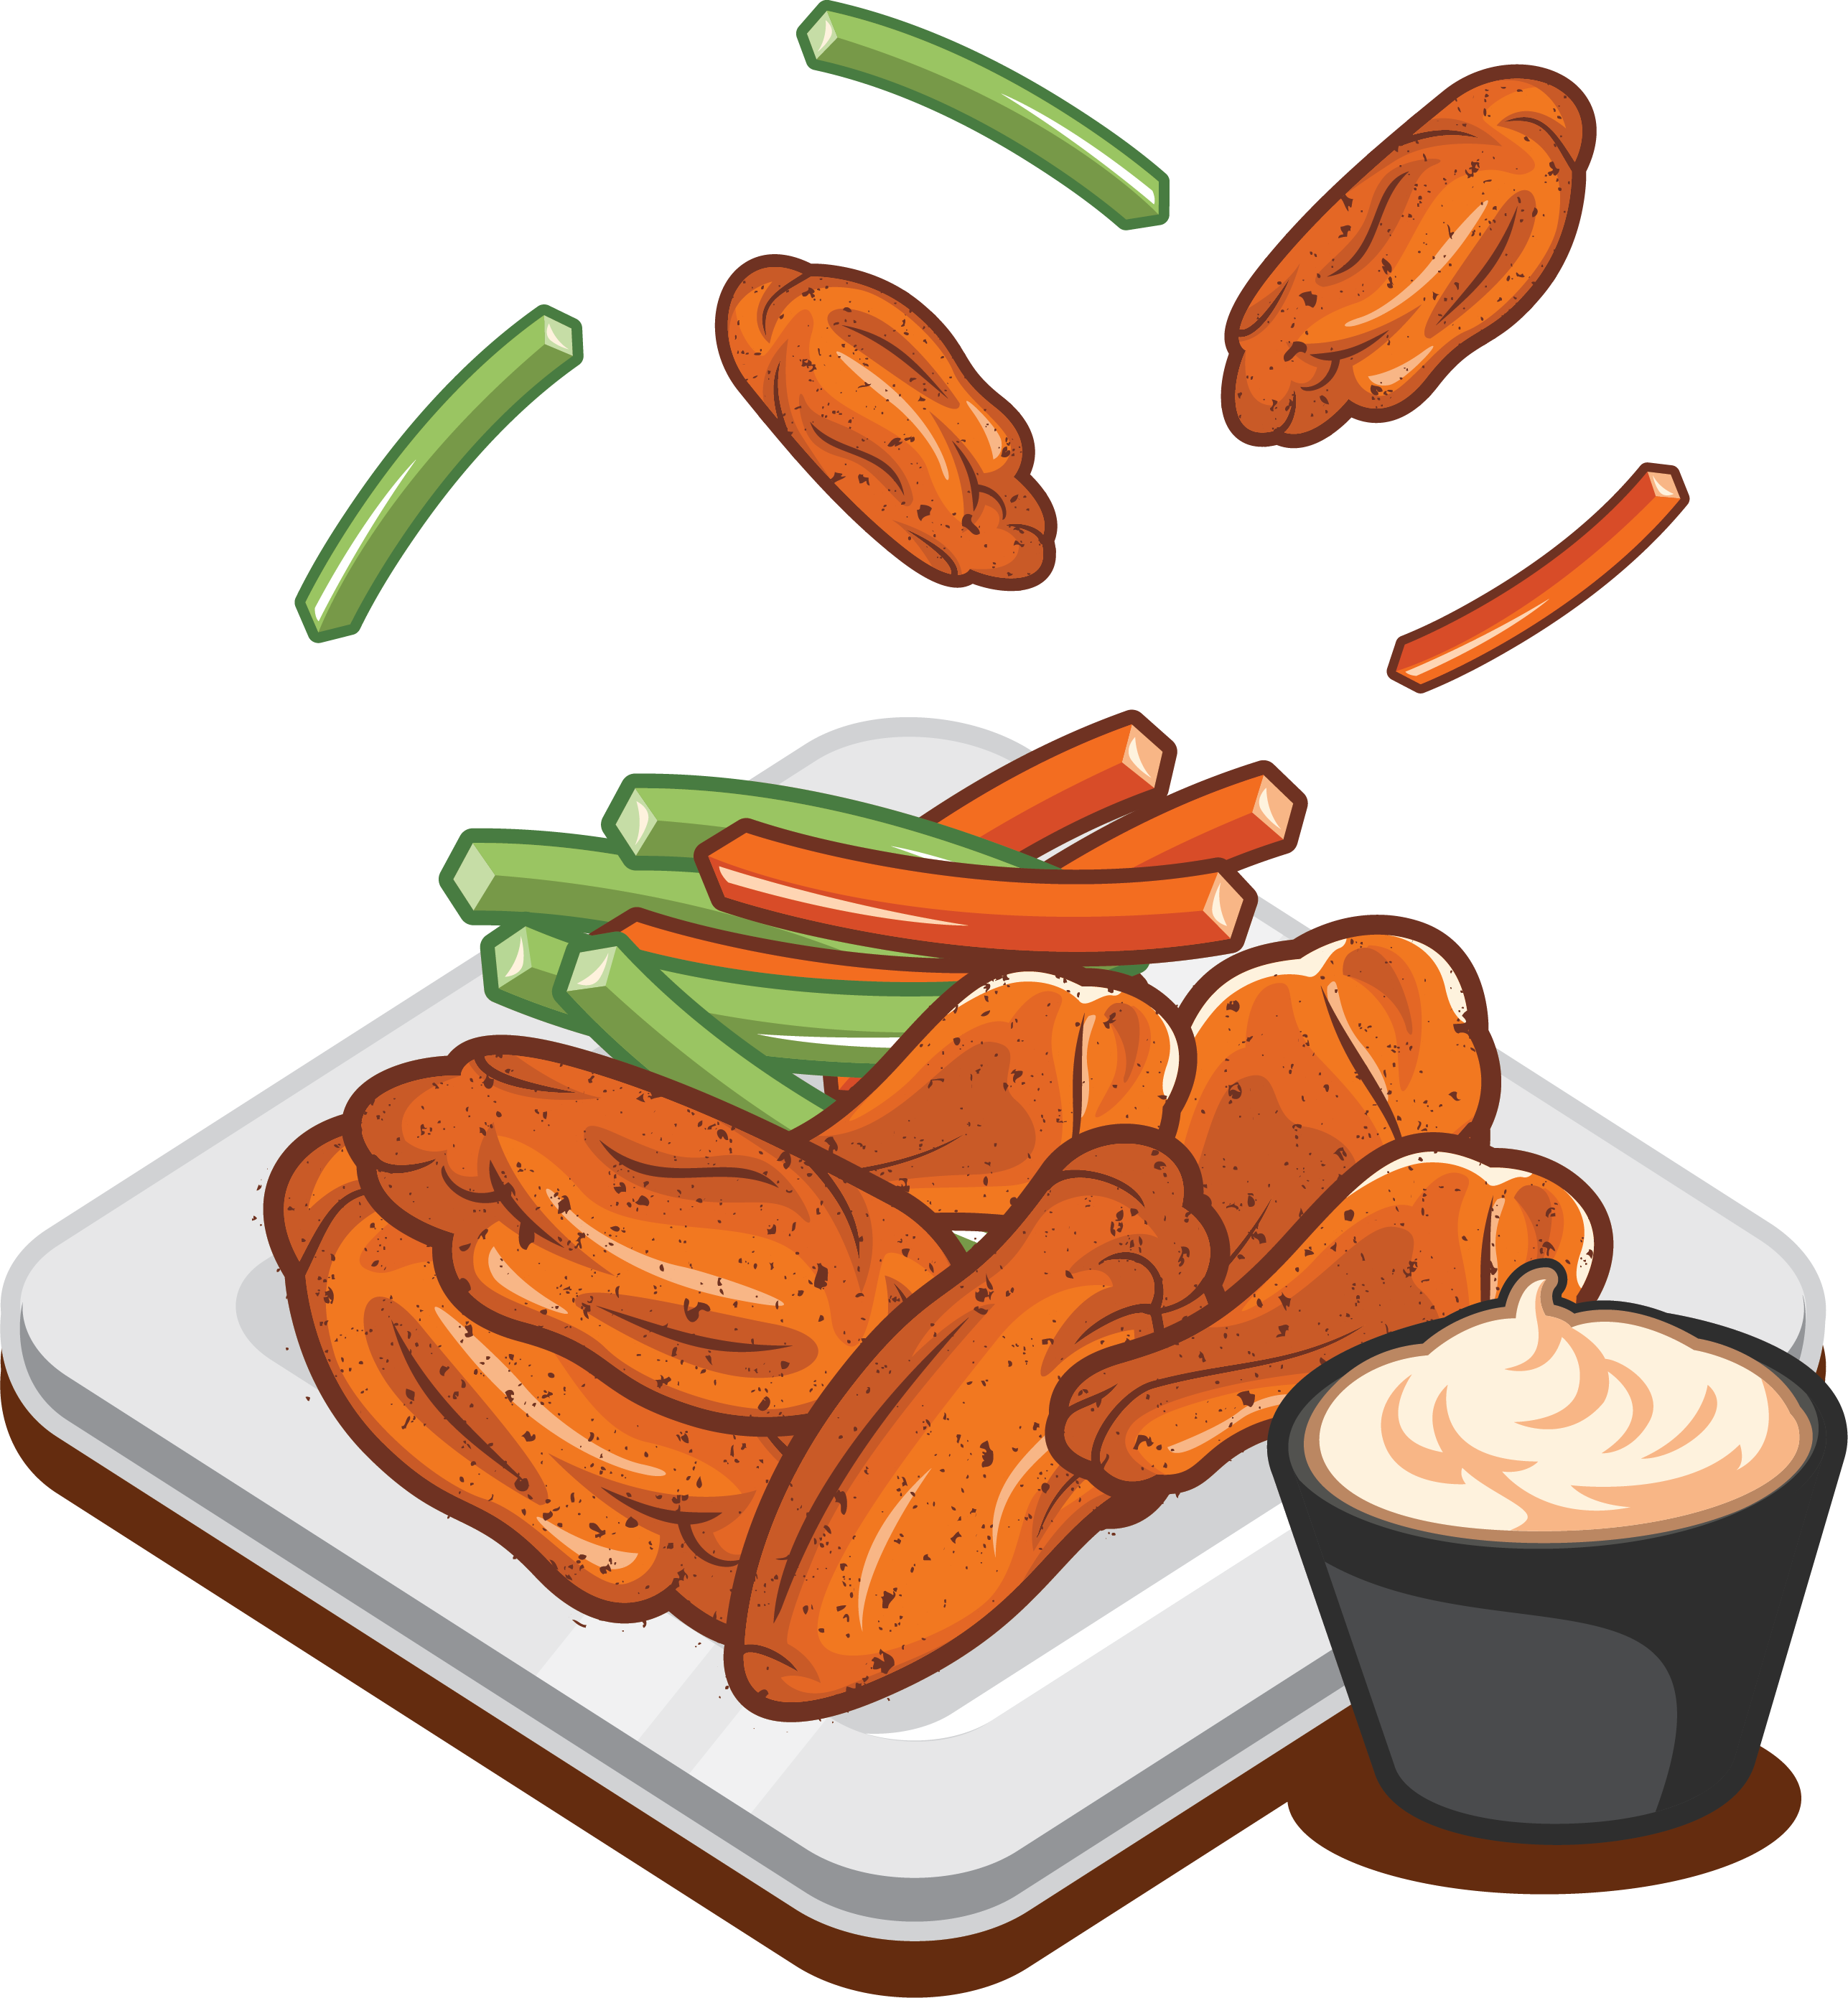 Buffalo wing sausage fried. Foods clipart fry